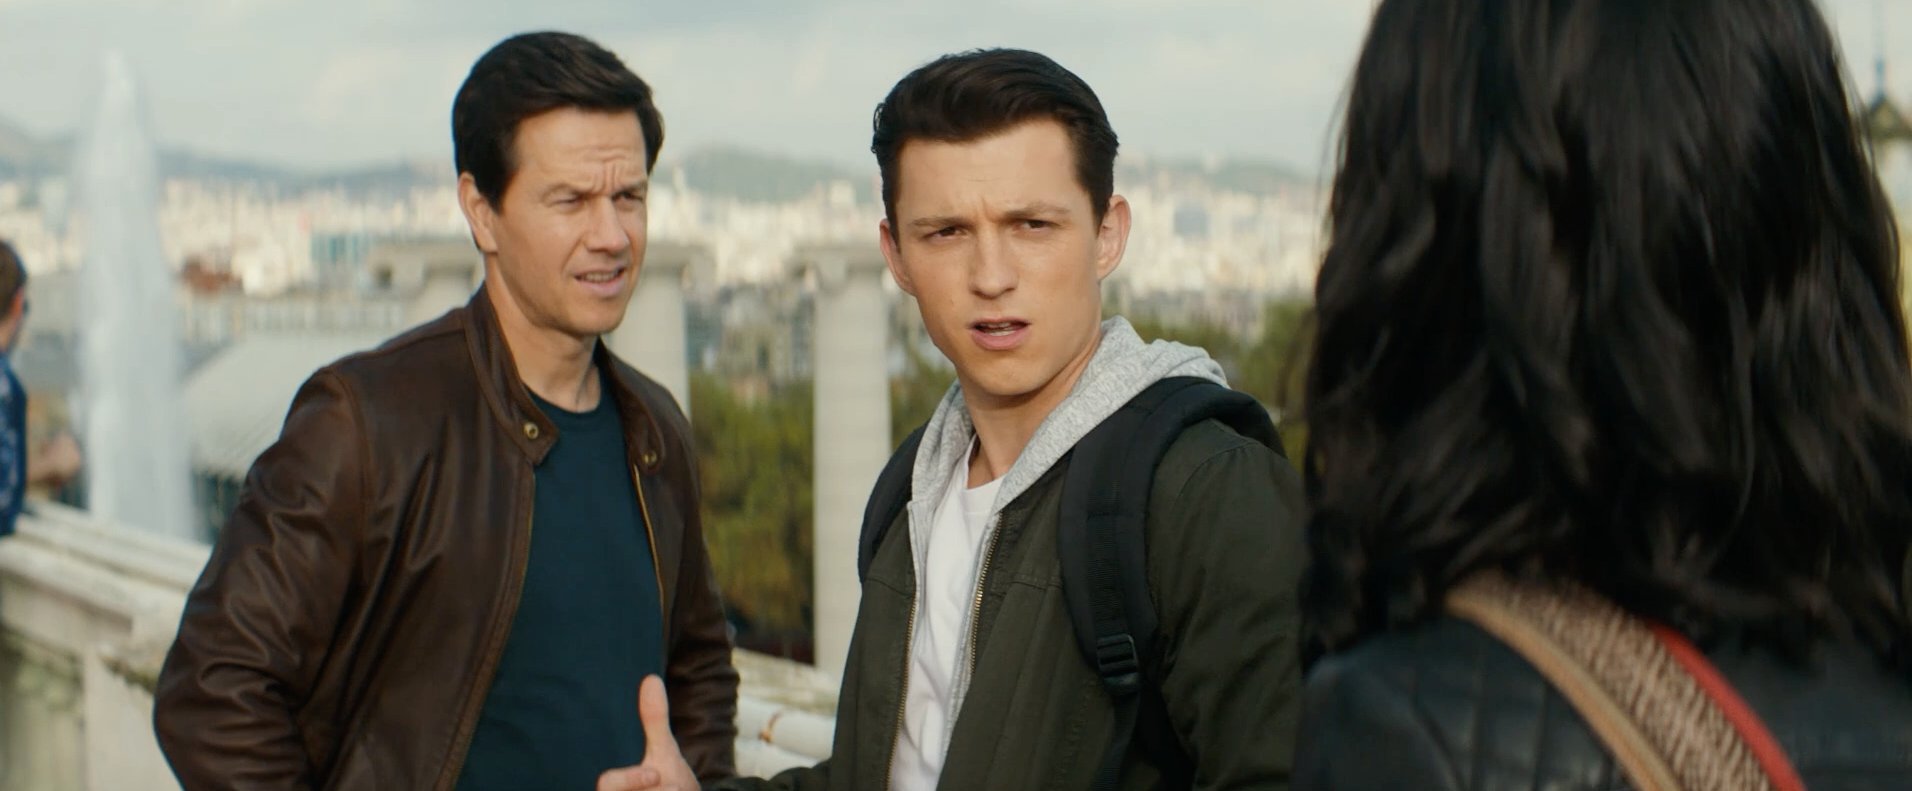 Mark Wahlberg and Tom Holland in "Uncharted"